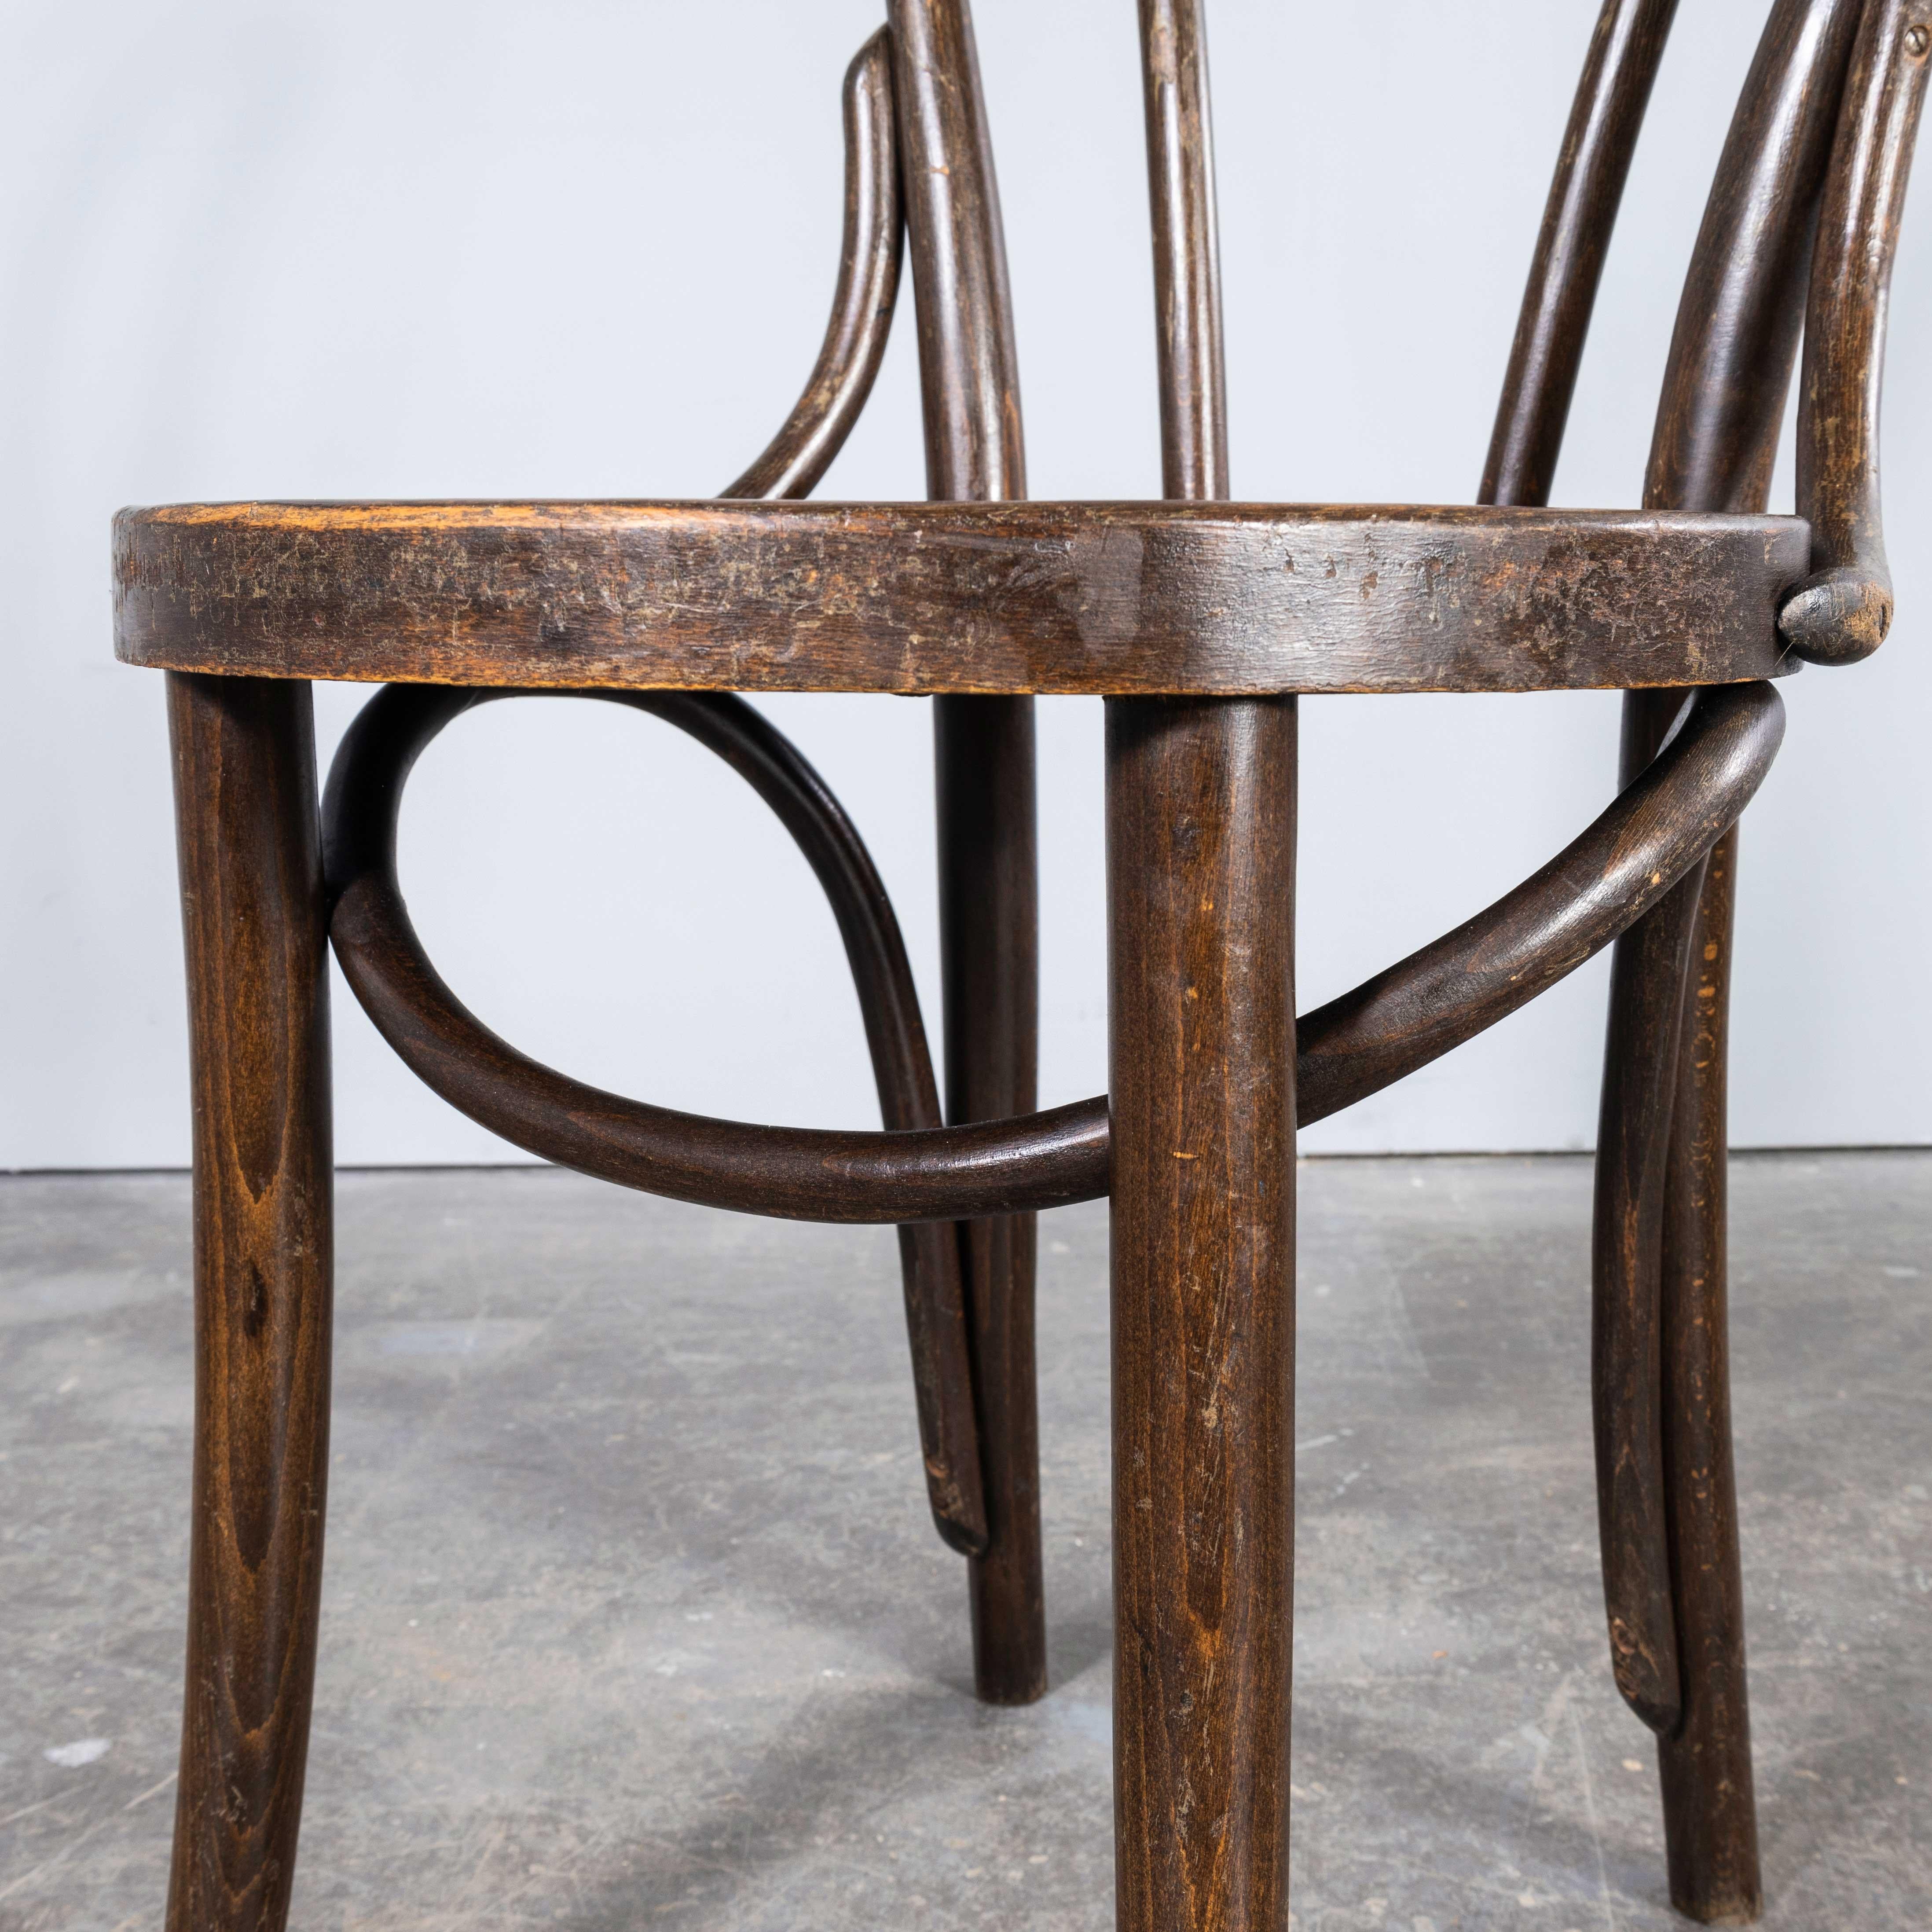 1960’s Classic Hoop Back Bentwood Dining Chairs – Good Quantity Available
1960’s Classic Hoop Back Bentwood Dining Chairs – Good Quantity Available. Beautiful dark walnut coloured chairs, they are the classic hooped bentwood shape. The chairs have